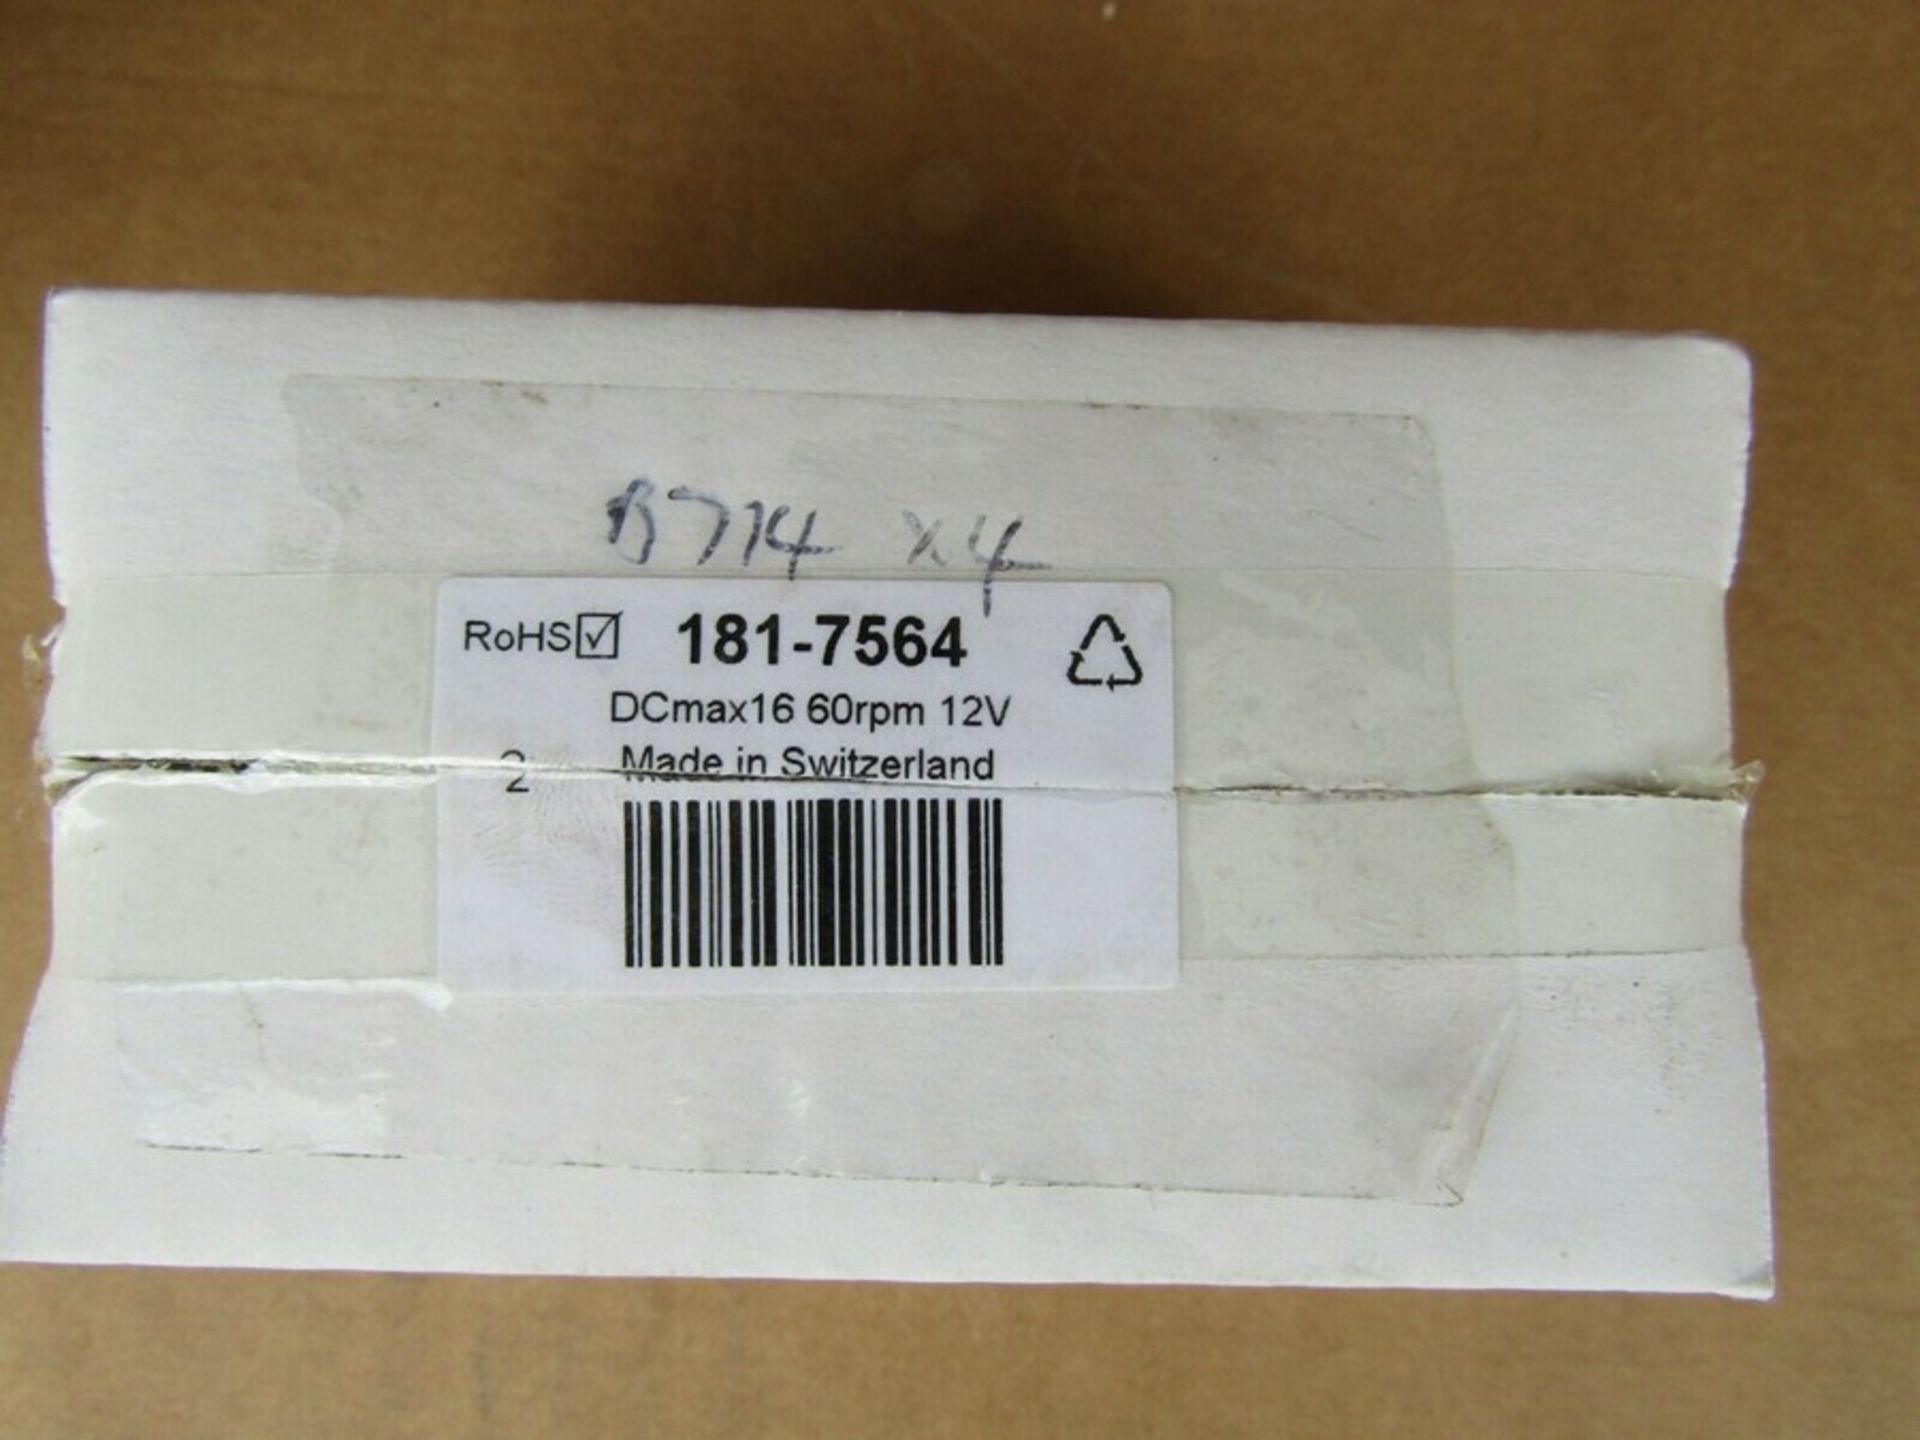 Maxon DCX 12Vdc 47Ncm Brushed DC Geared Motor Output Speed 6200 rpm B714 1817564 - Image 2 of 2